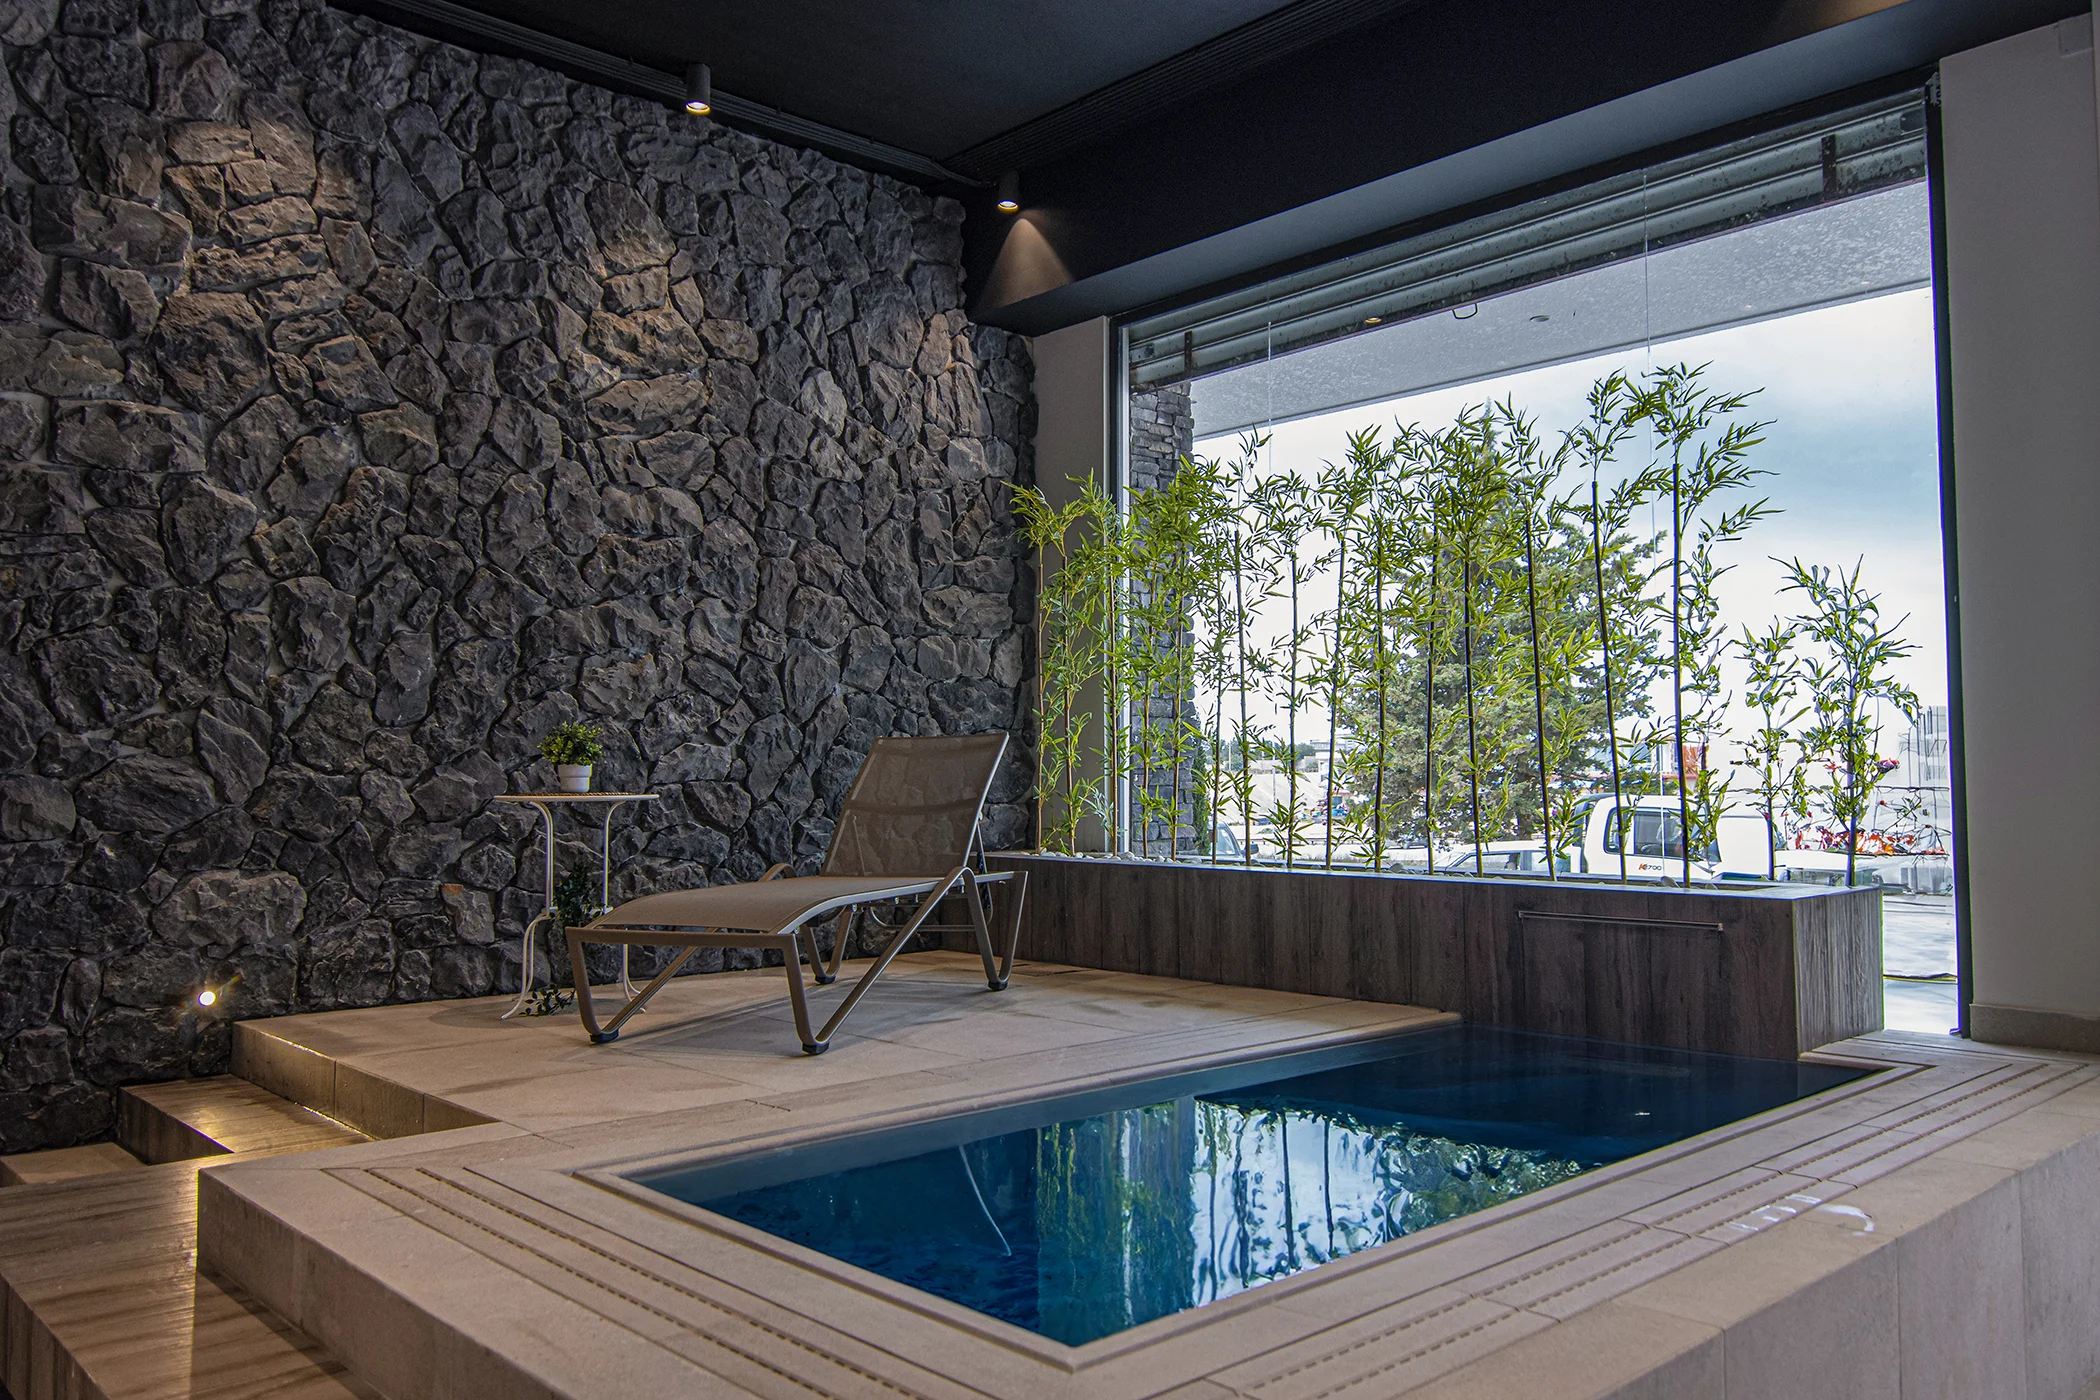 a swimming pool inside and beautiful stones on the wallon the 